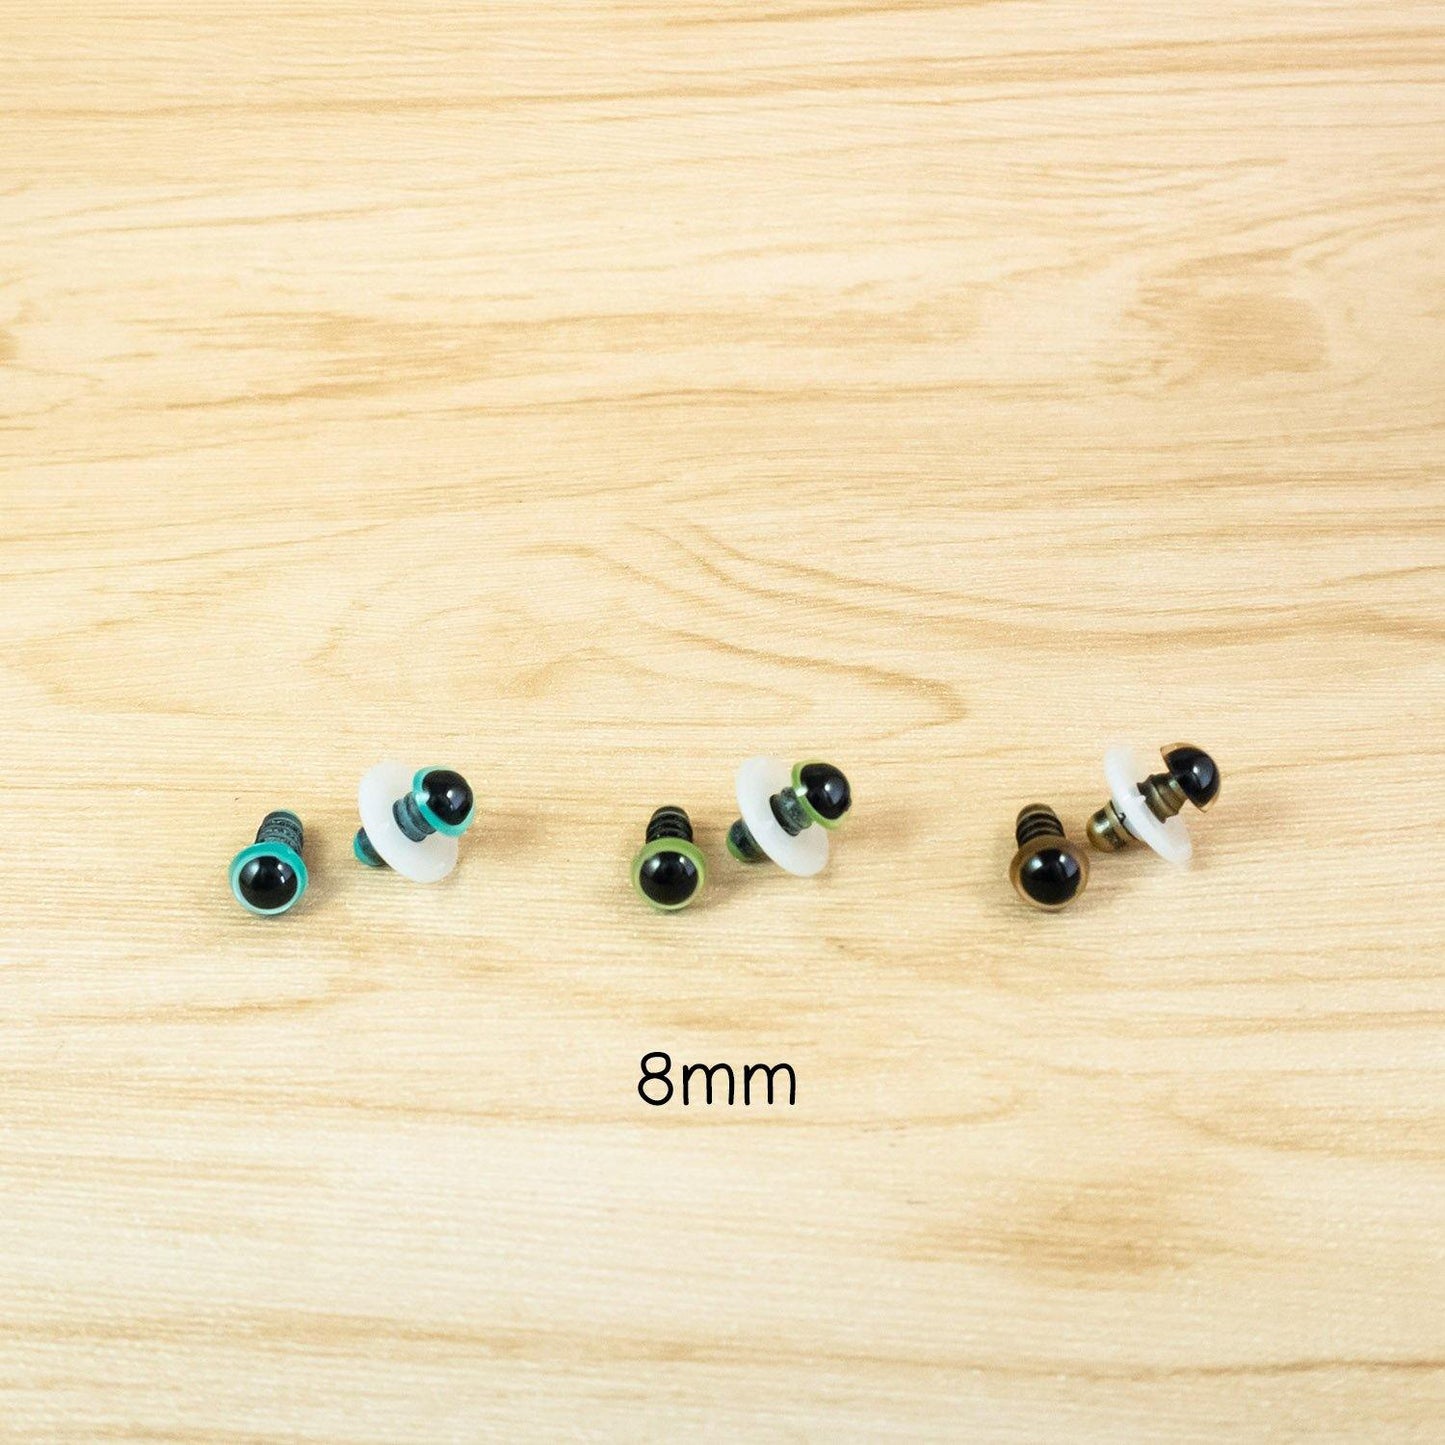 8mm pearl colour safety eyes for handmade dolls - Pearl Blue, pearl green, Gold